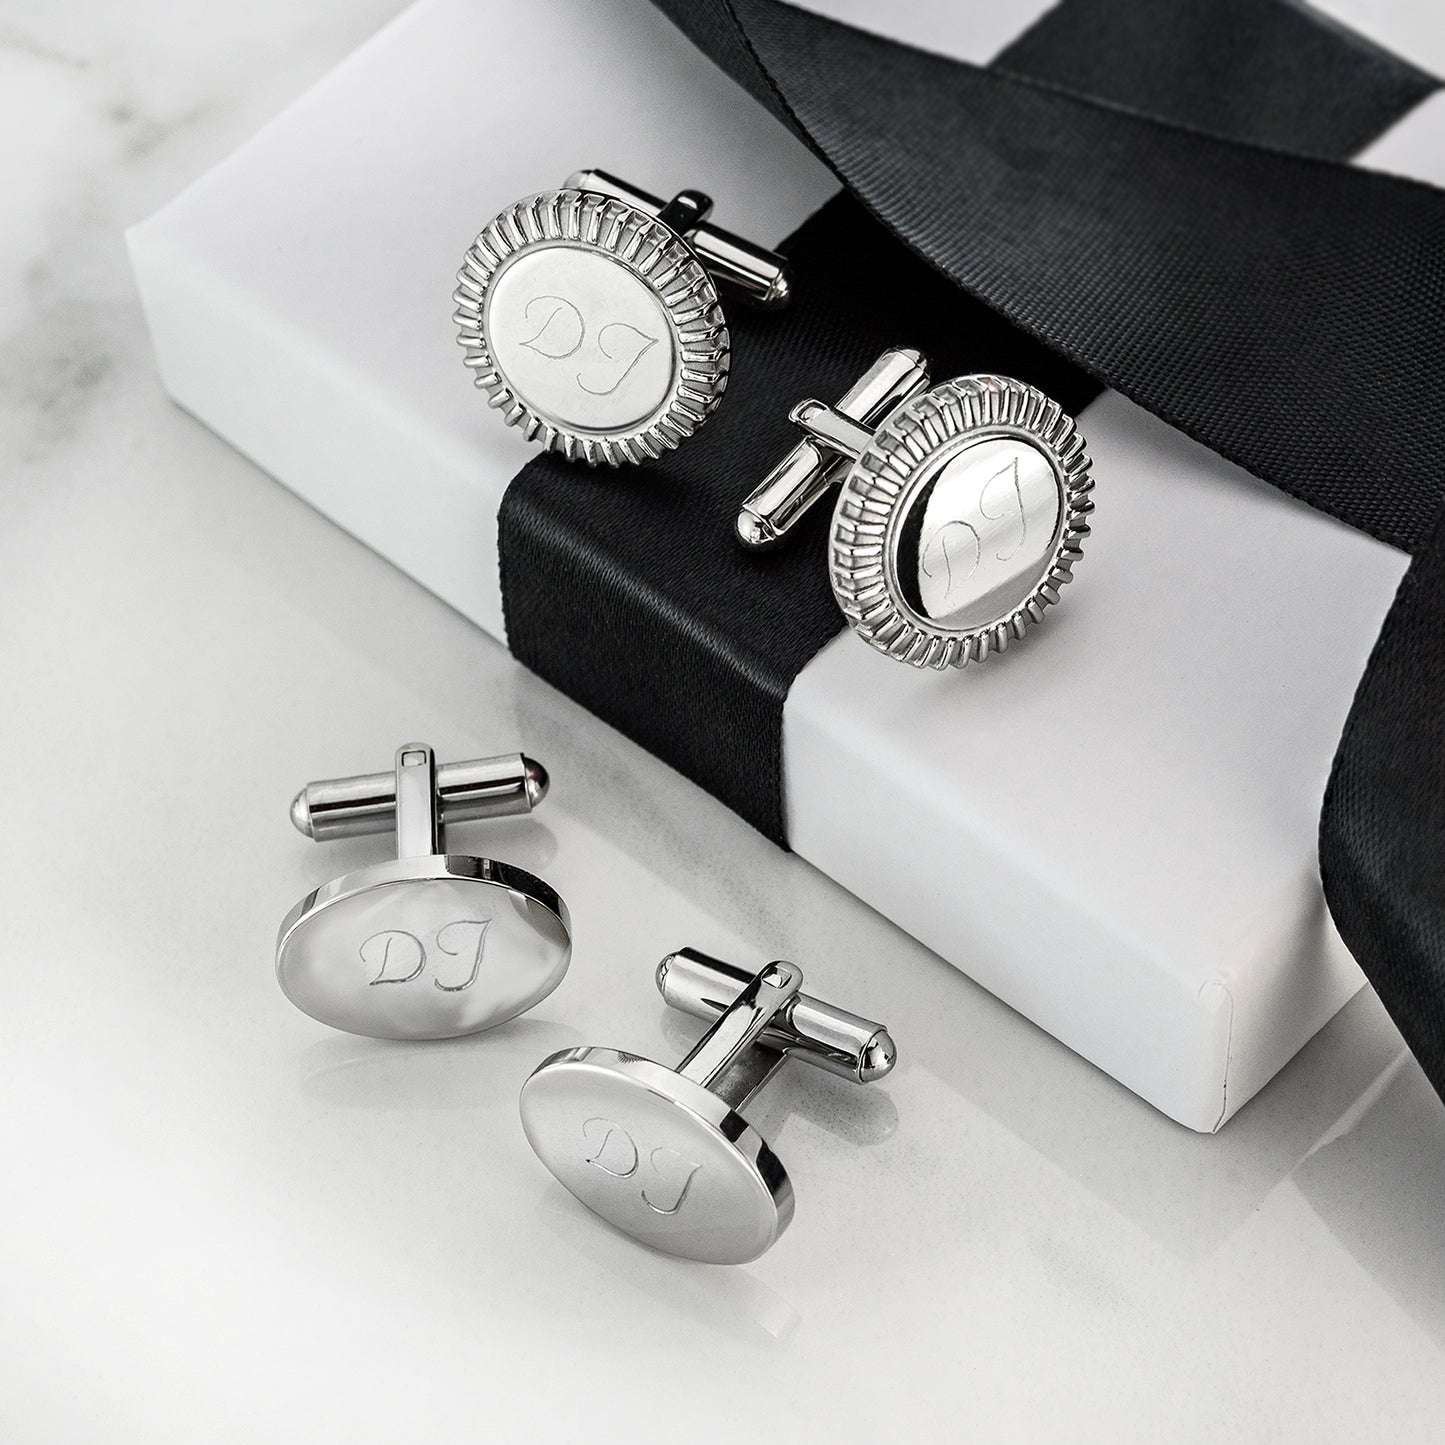 13mm Round Stainless Steel Cufflinks - Perfect Groomsmen or Gift for Him